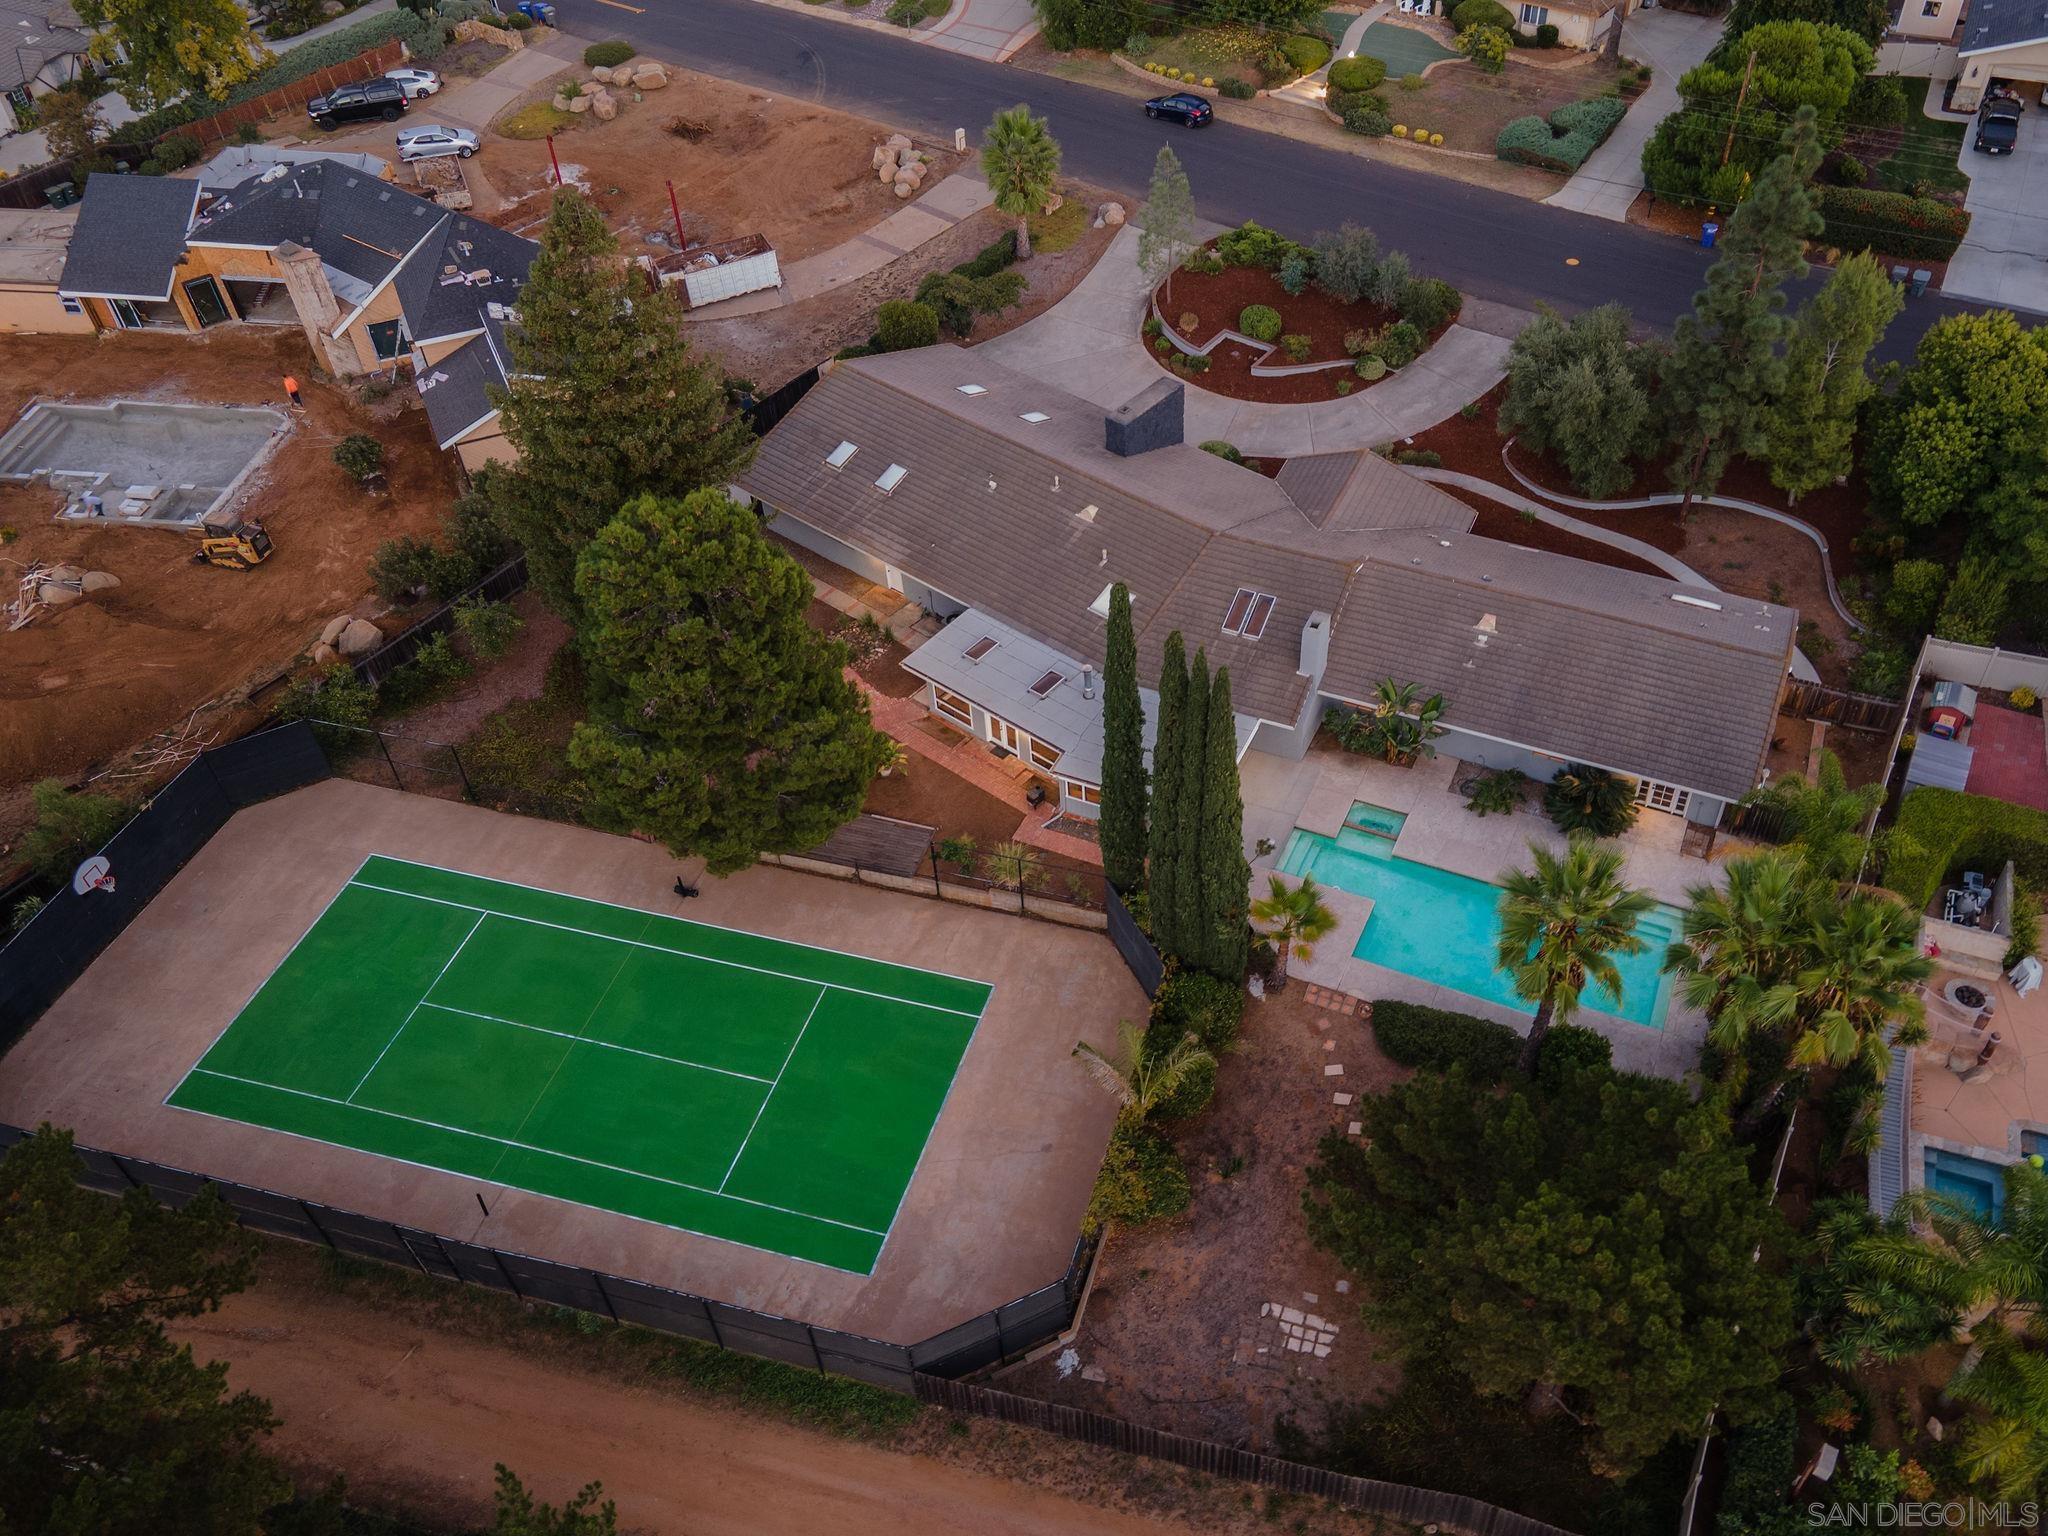 an aerial view of a backyard and a house